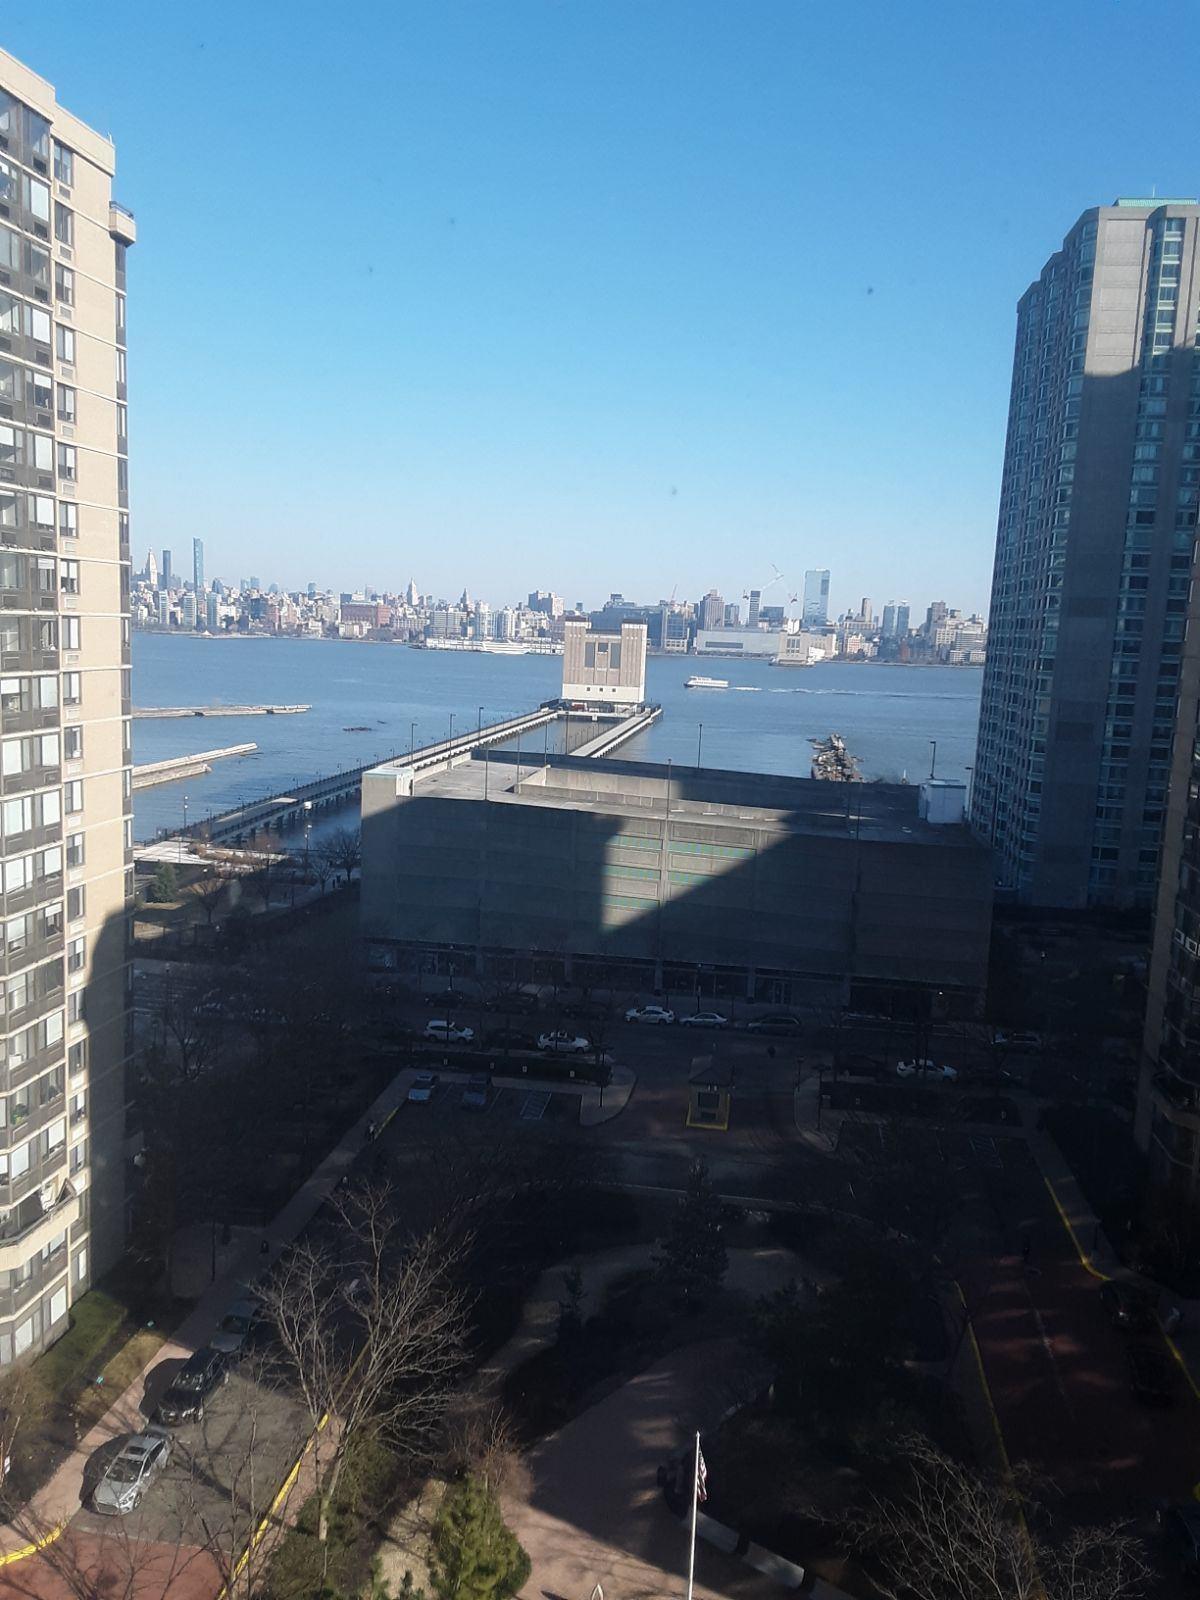 45 River Dr South Unit 1414, Jersey City, New Jersey, 07310, United States, 3 Bedrooms Bedrooms, ,2 BathroomsBathrooms,Residential,For Sale,45 River Dr South Unit 1414,1509990